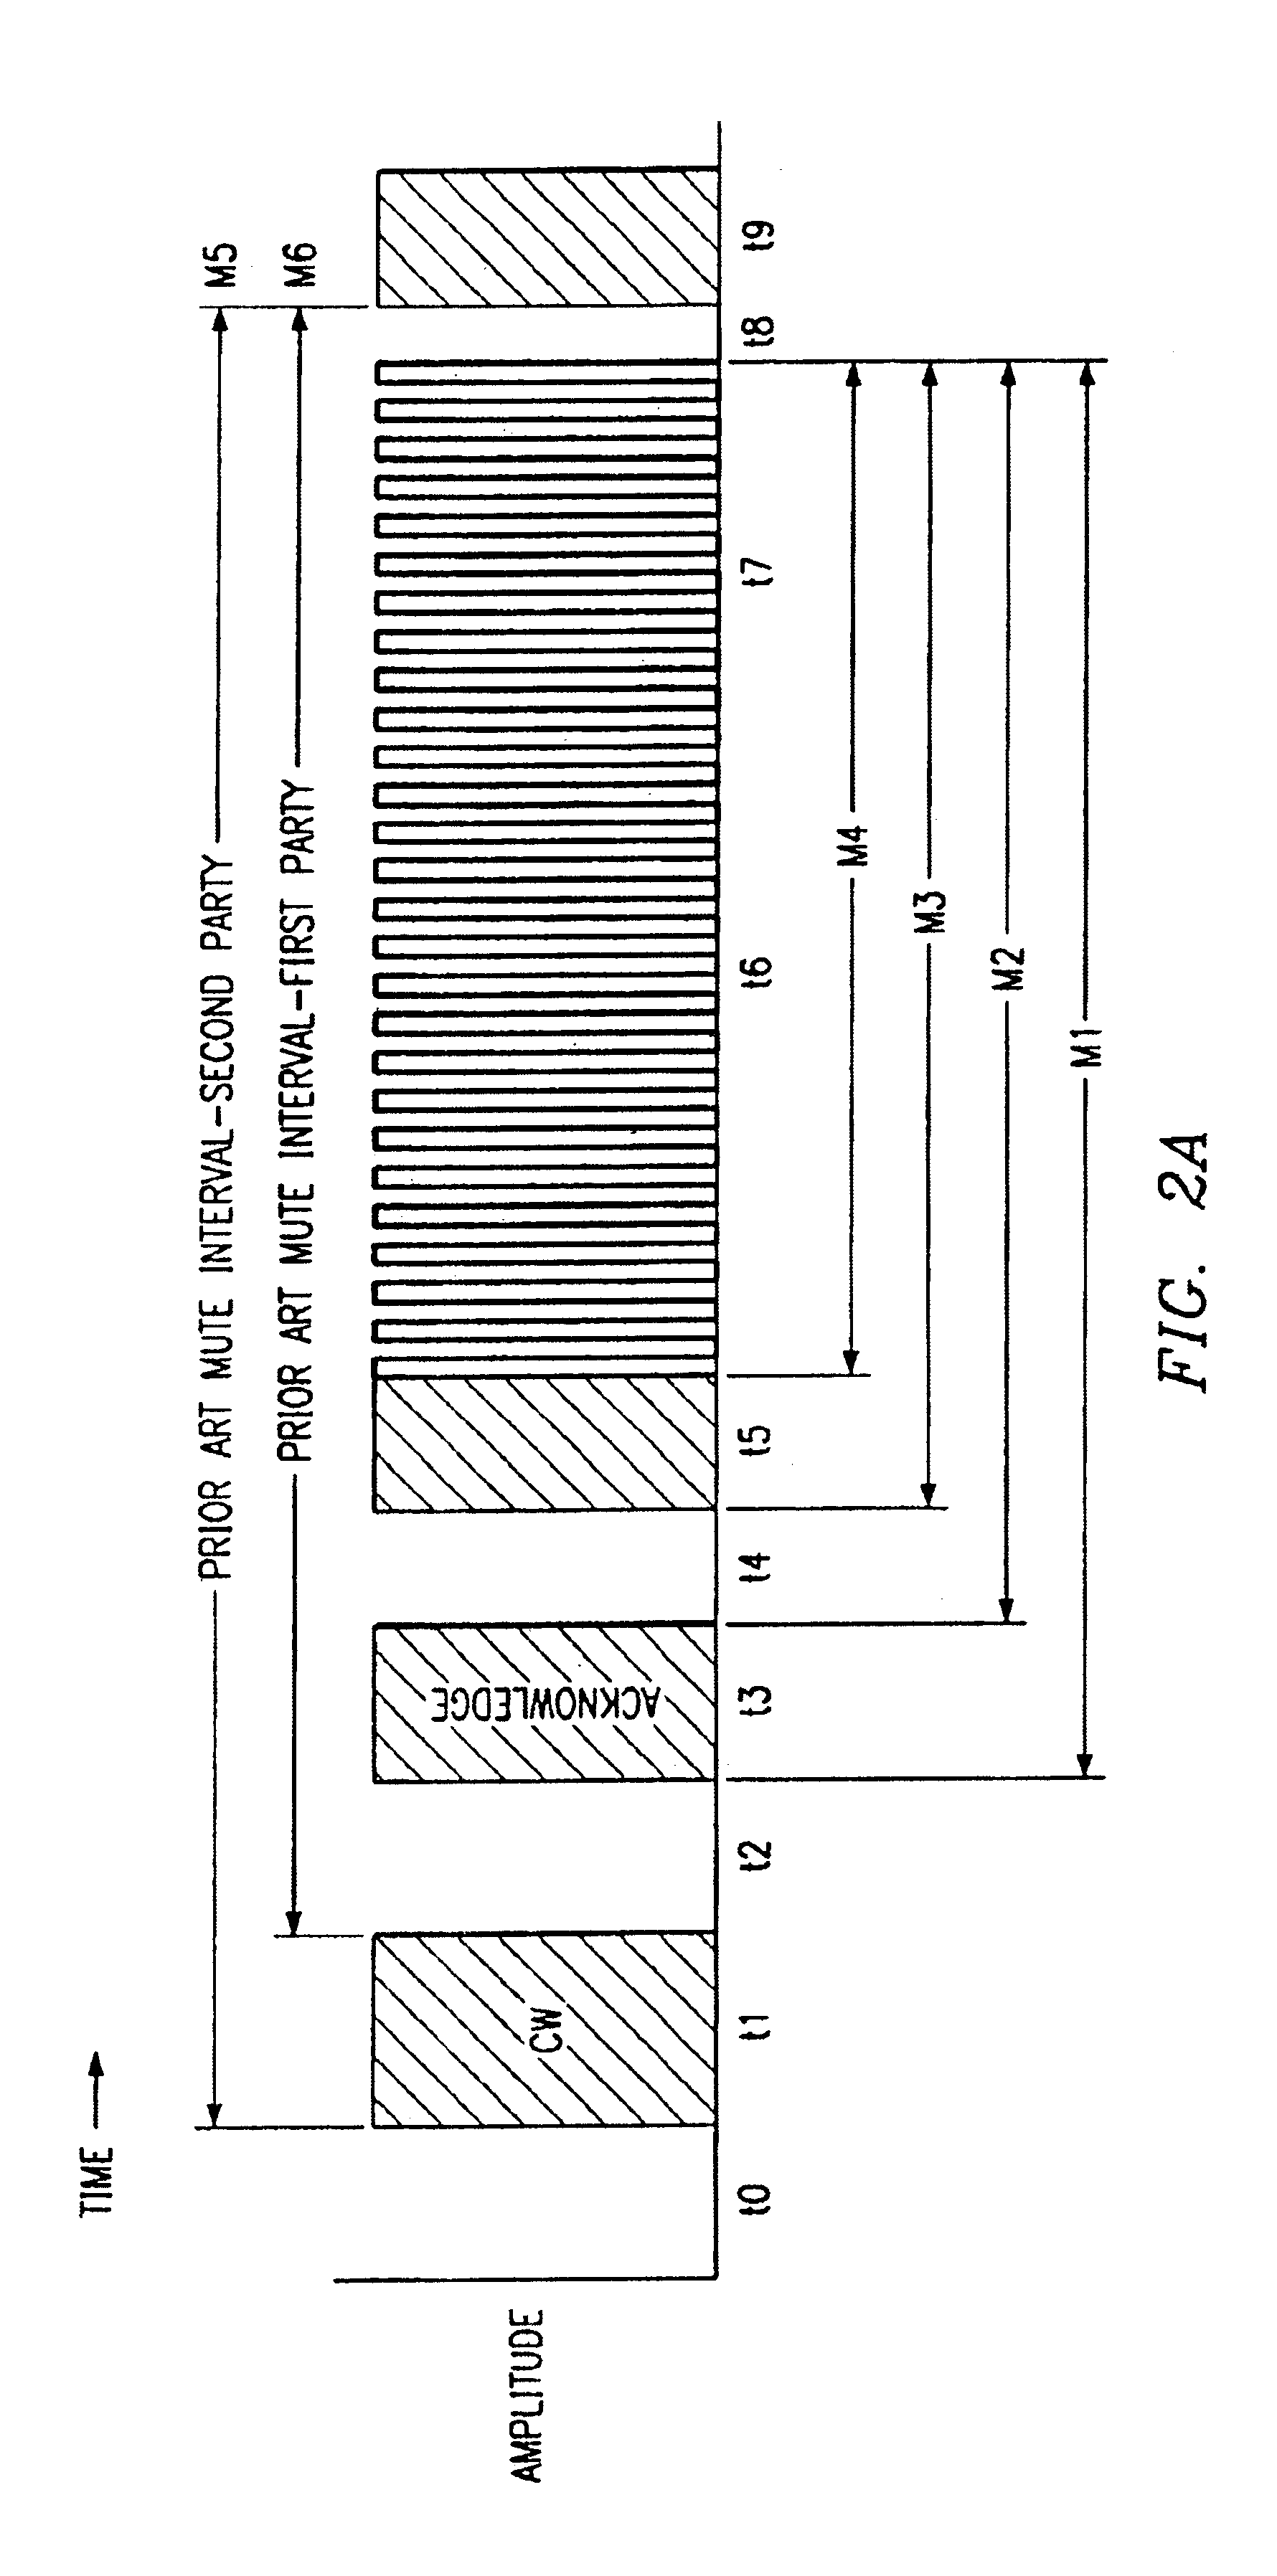 Enhanced call-waiting with caller identification method and apparatus using notch filters